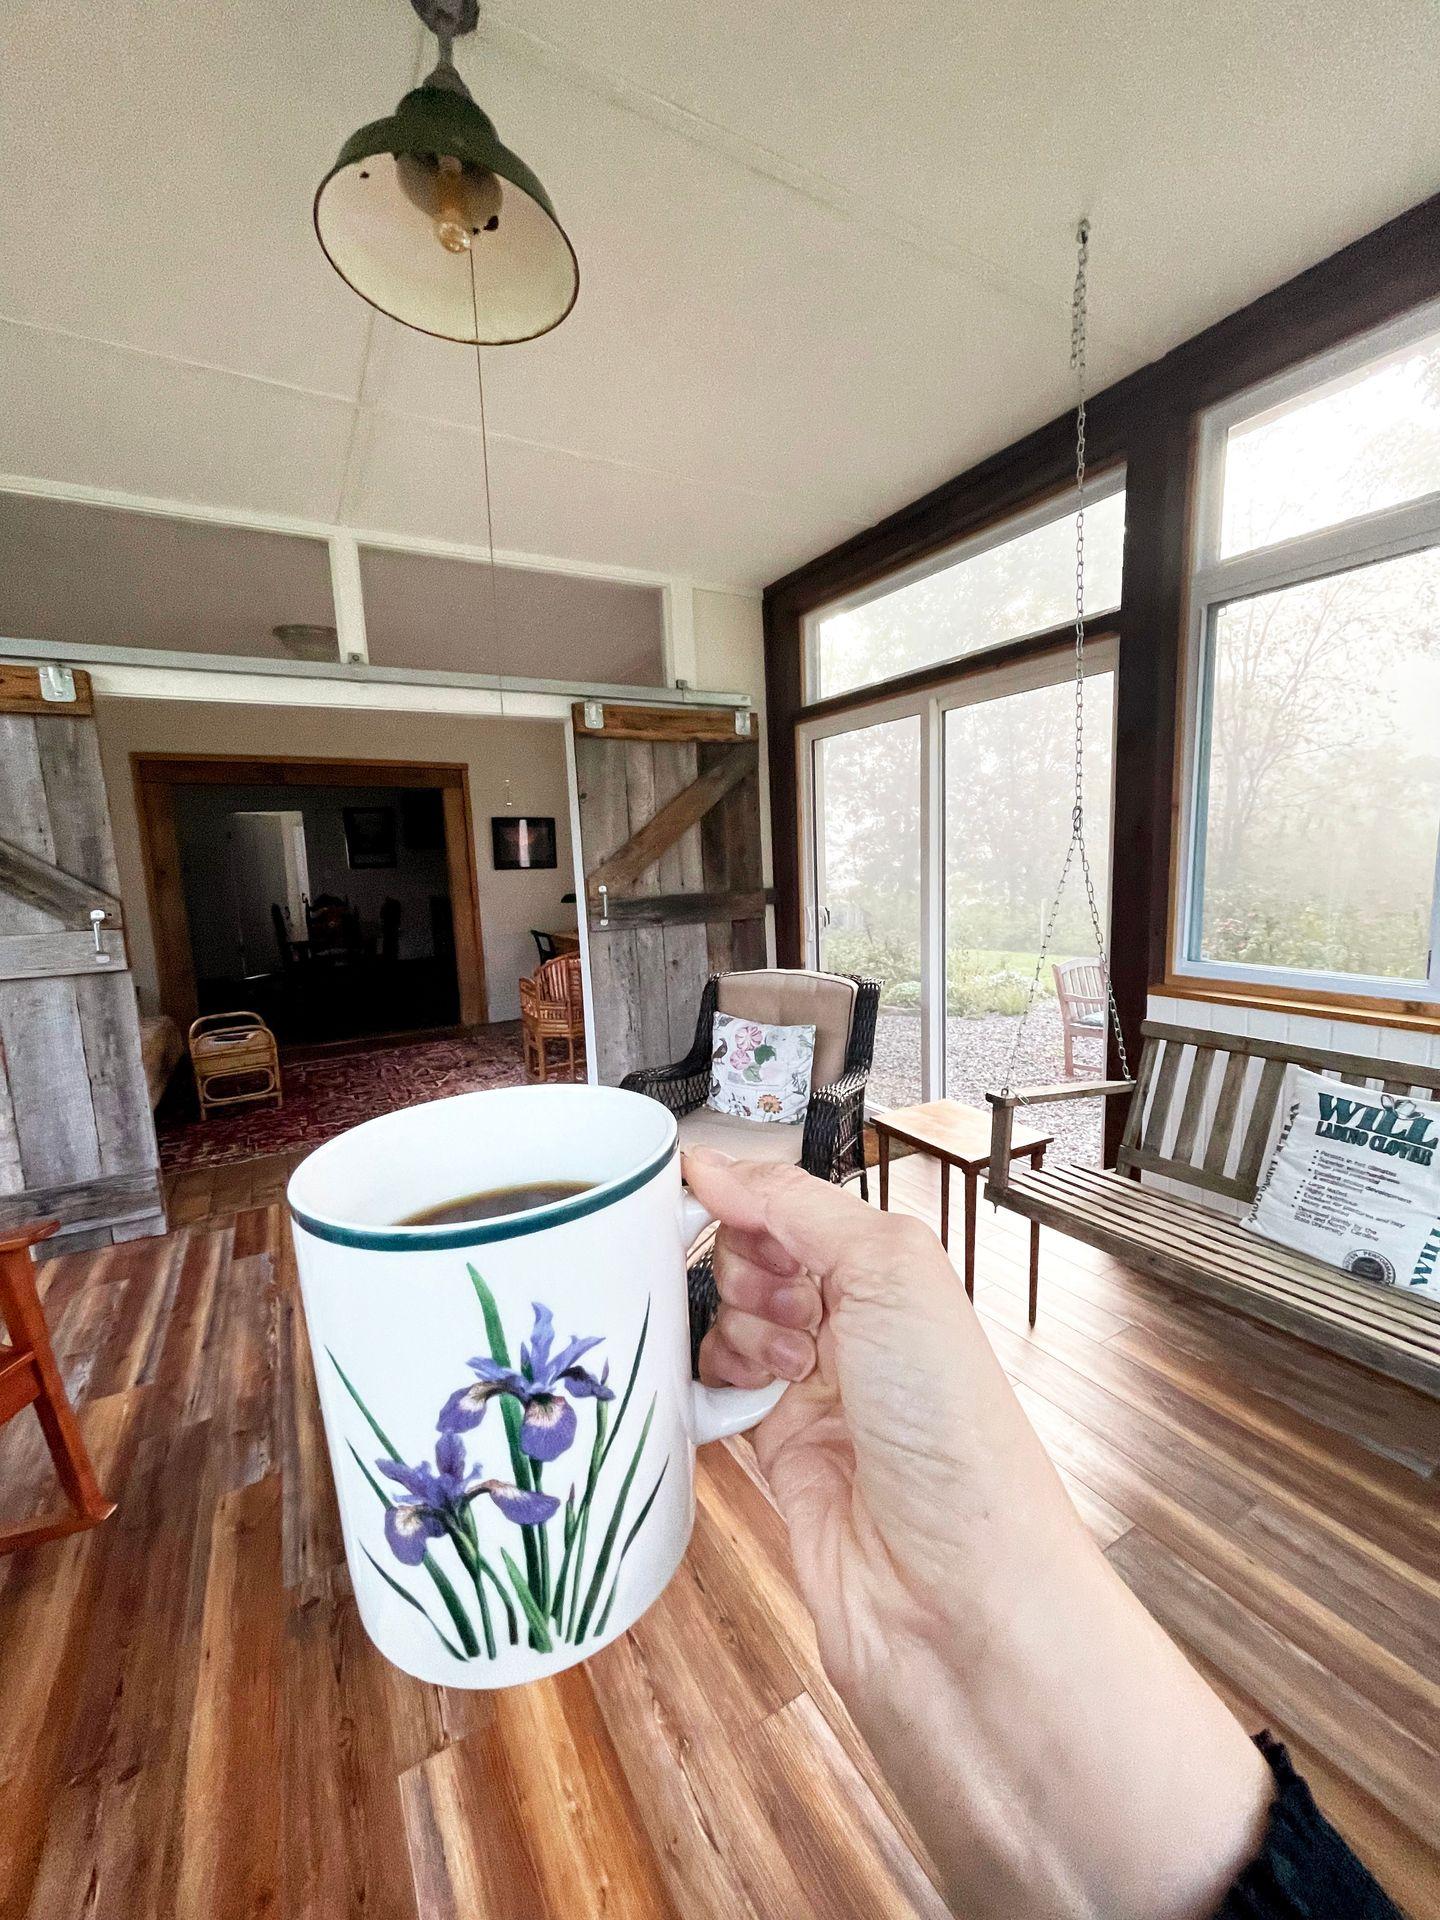 Holding a coffee mug with a purple flower inside of Five Springs Farm airbnb.